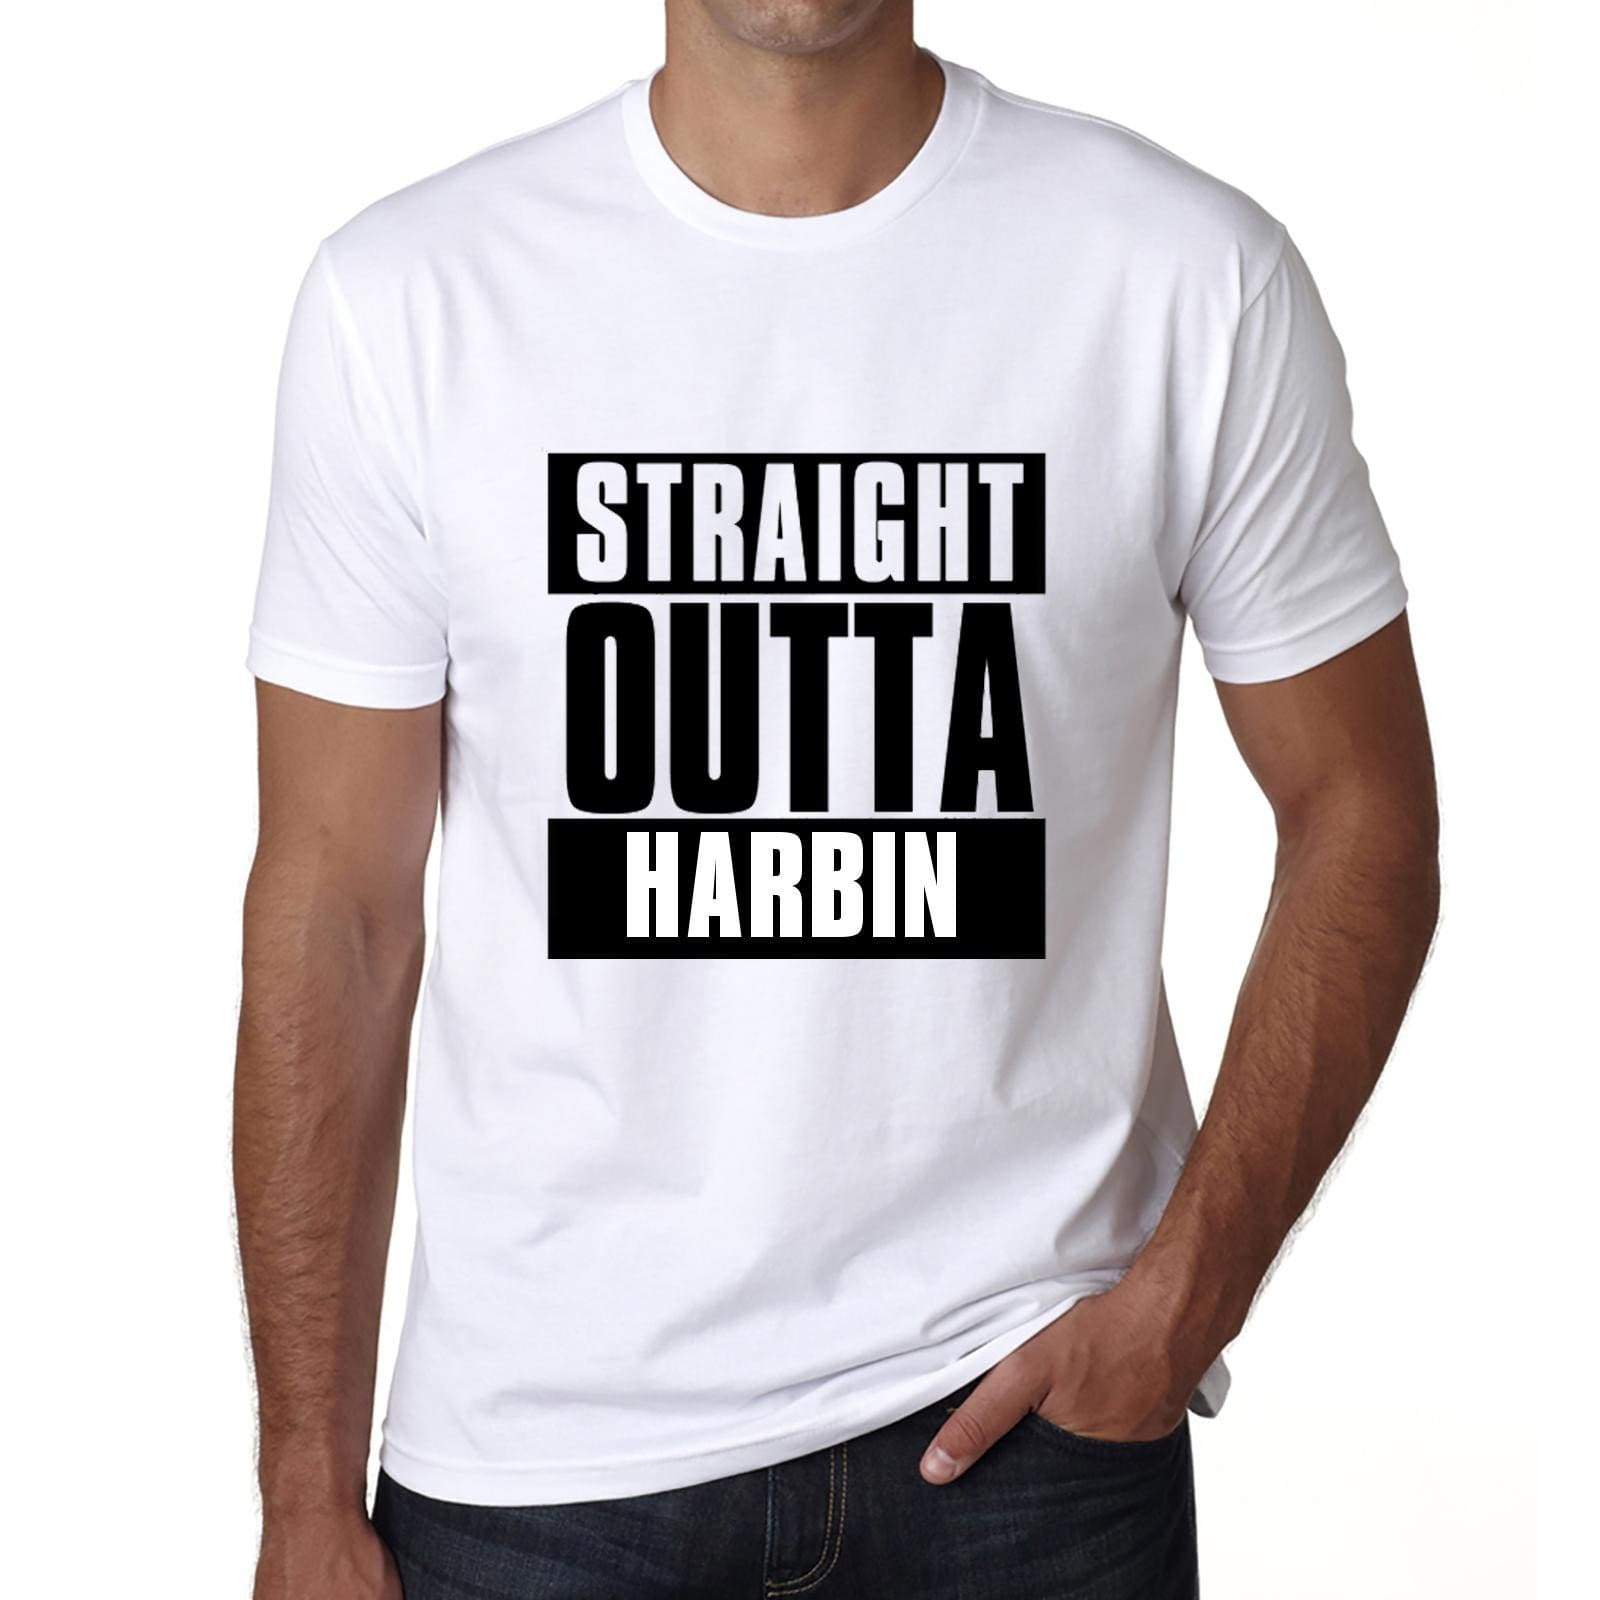 Straight Outta Harbin Mens Short Sleeve Round Neck T-Shirt 00027 - White / S - Casual